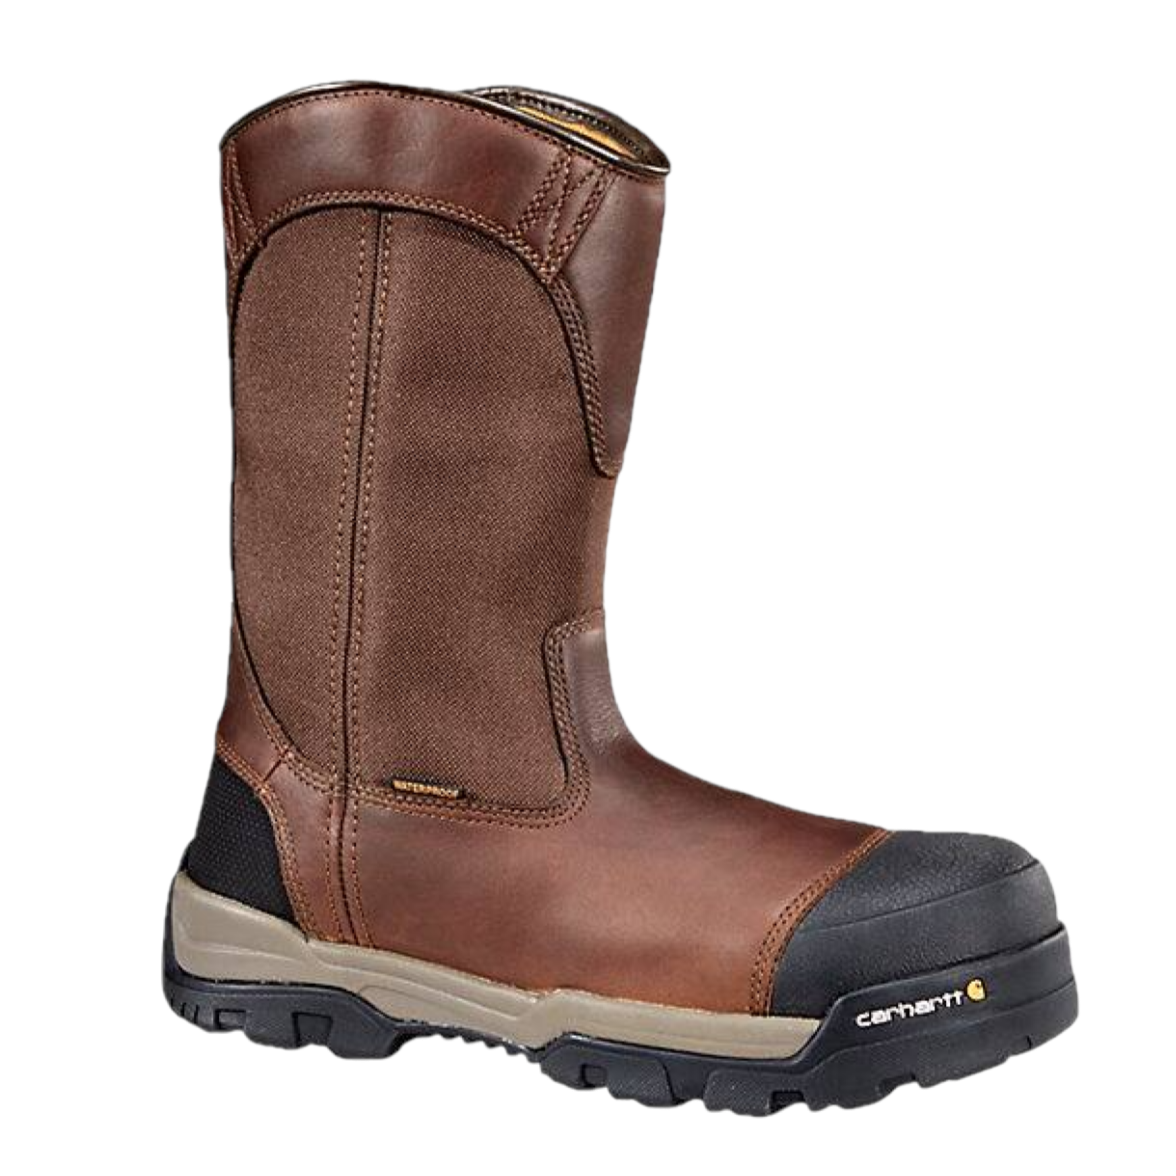 Carhartt® Men's Ground Force Composite Toe Brown Work Boots CME1355